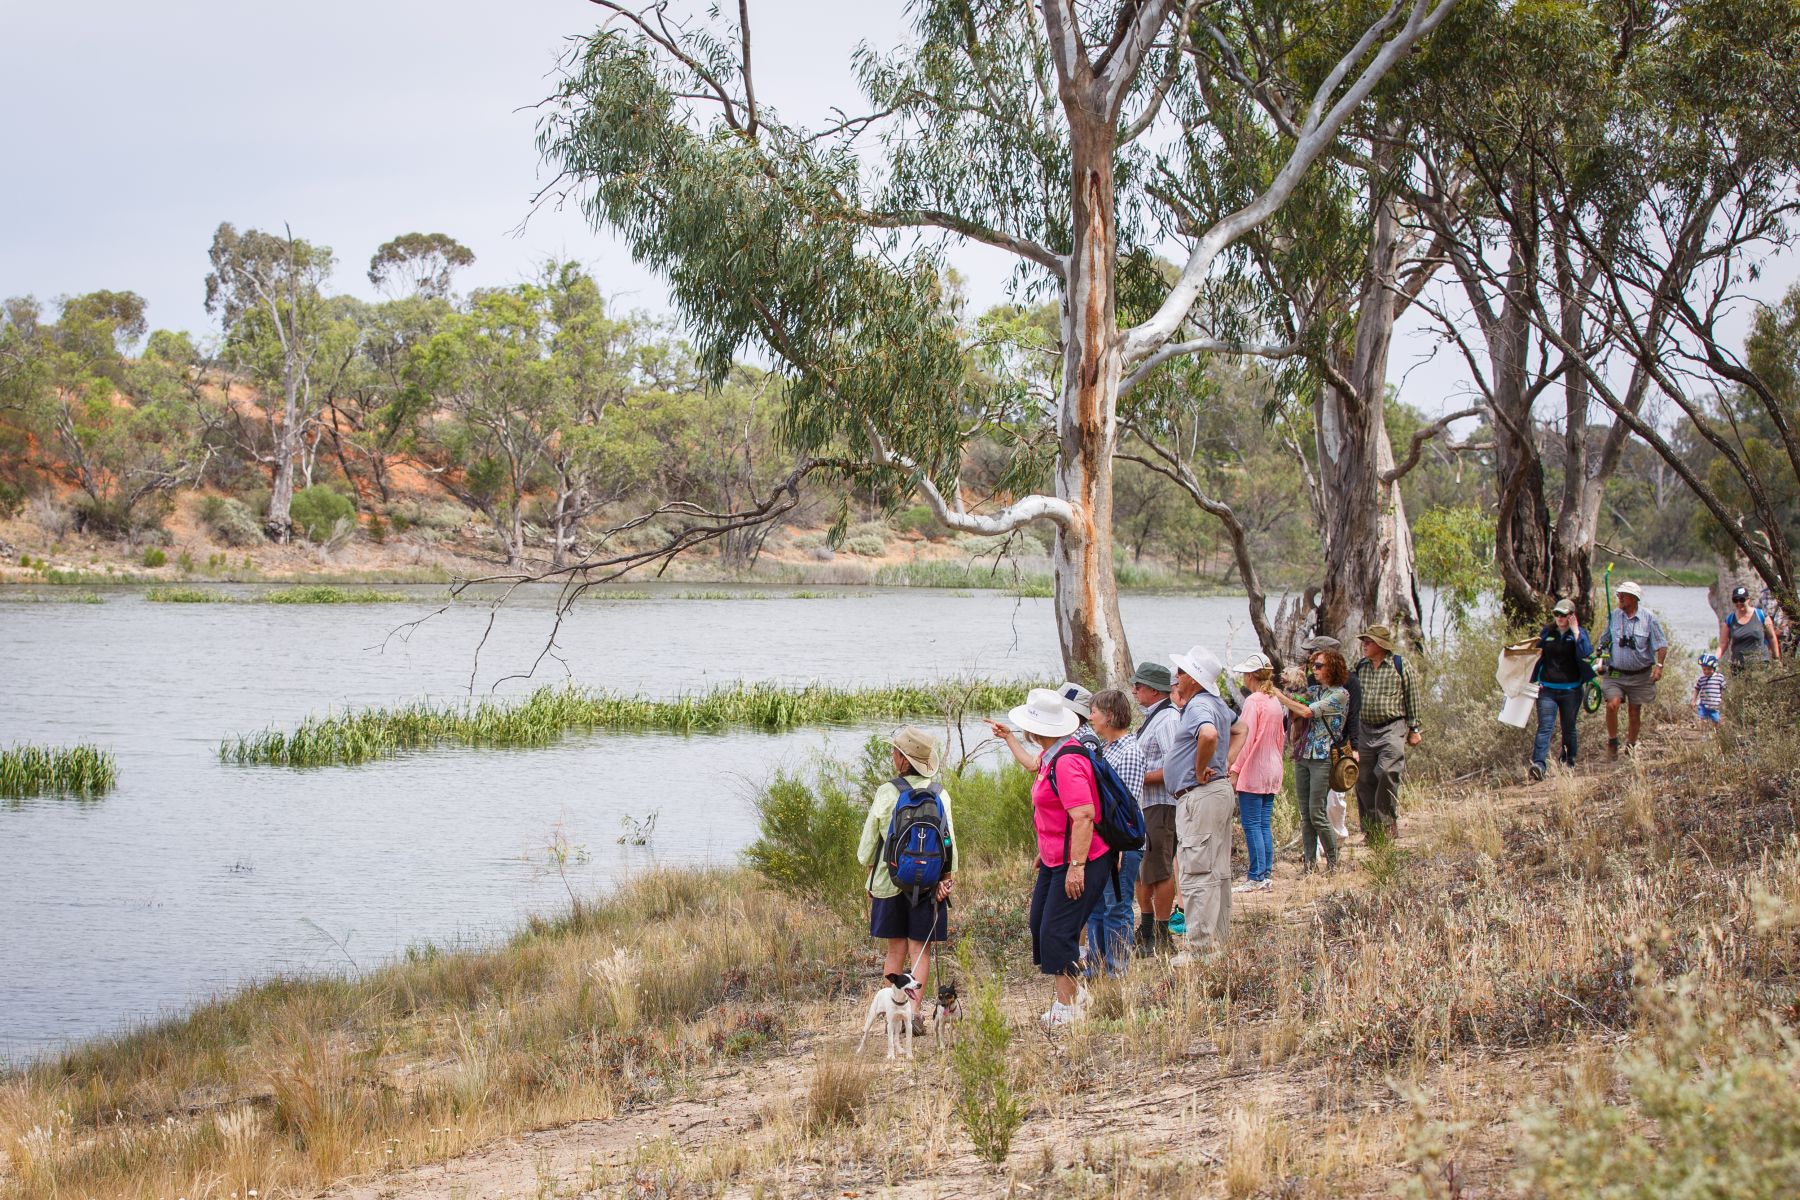 A group of bushwalkers are walking along the riverbank. They have two small dogs with them on a leash. Two of the bushwalkers are pointing out to a landmark on the other side of the river. 